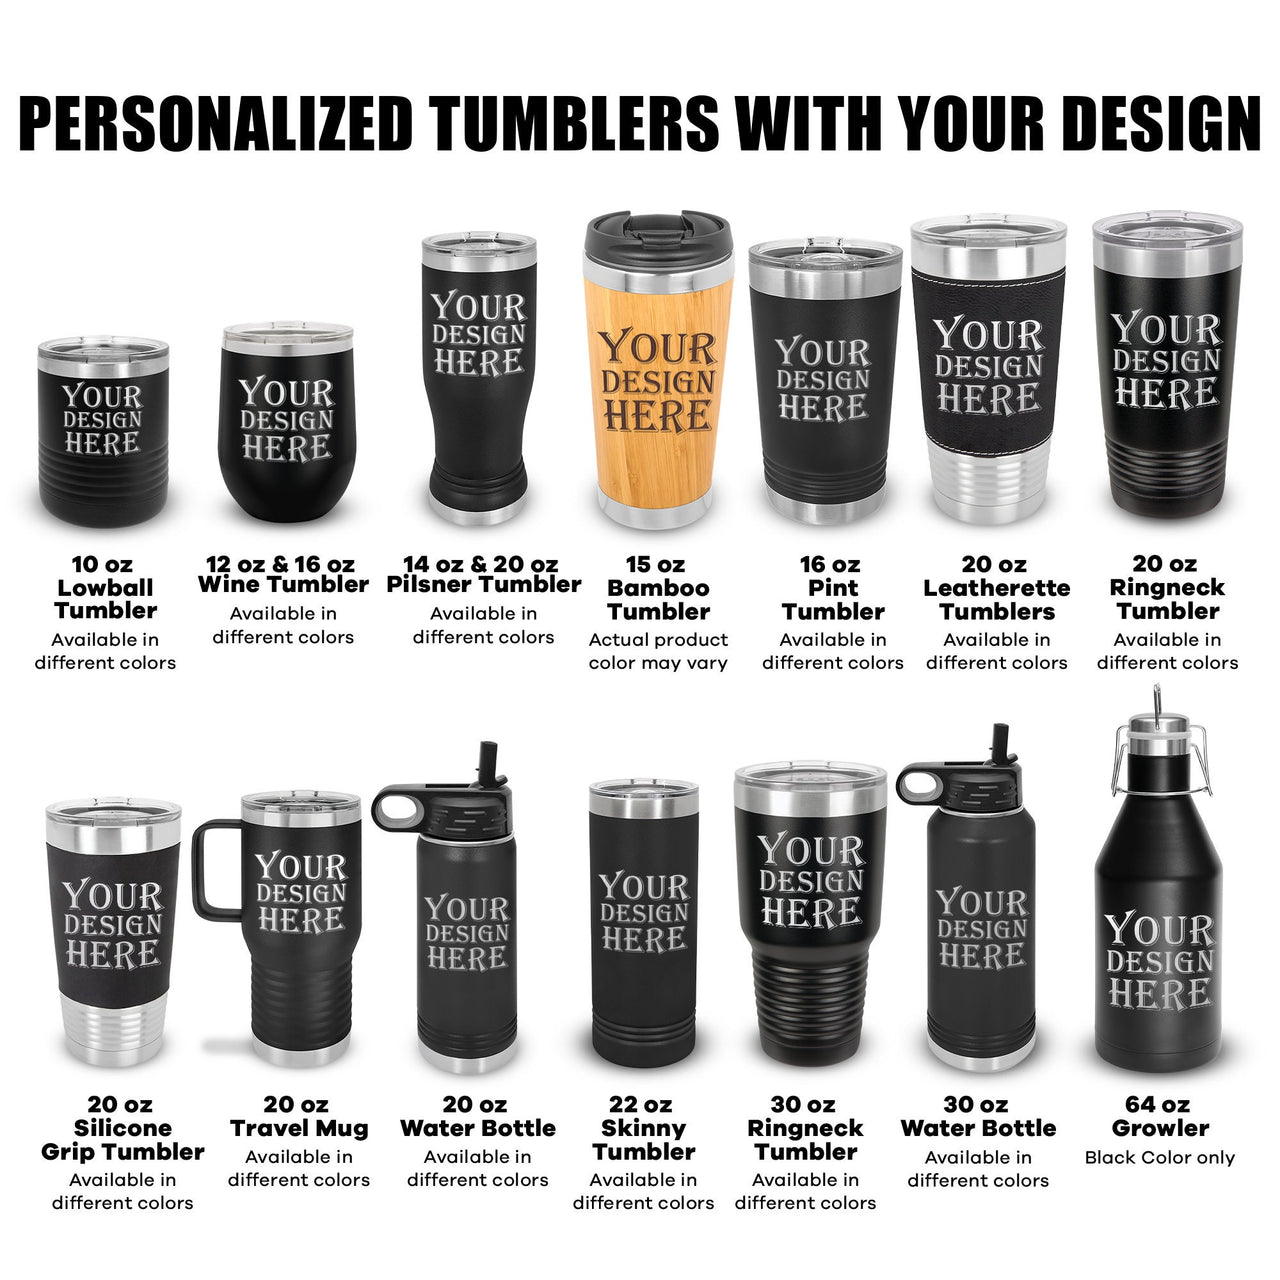 Personalized Bigfoot Saw Me but Nobody Believes Me Tumbler, Custom Engraved Tumbler with Sasquatch, Water Bottle, Skinny Tumbler Collection